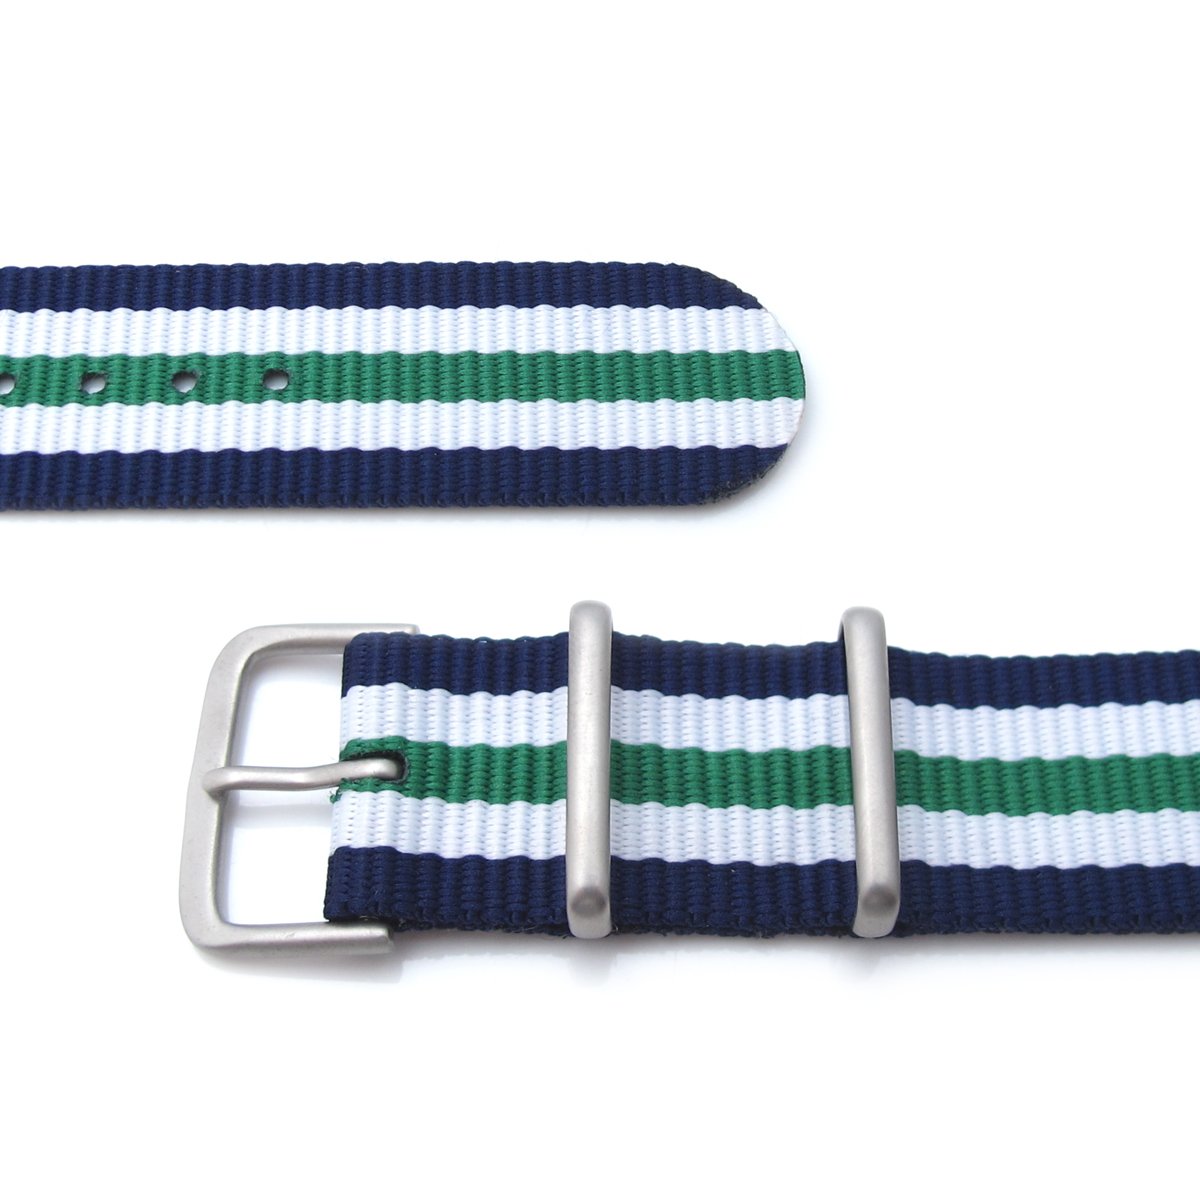 MiLTAT 20mm G10 military watch strap ballistic nylon armband Brushed Blue White & Green Strapcode Watch Bands